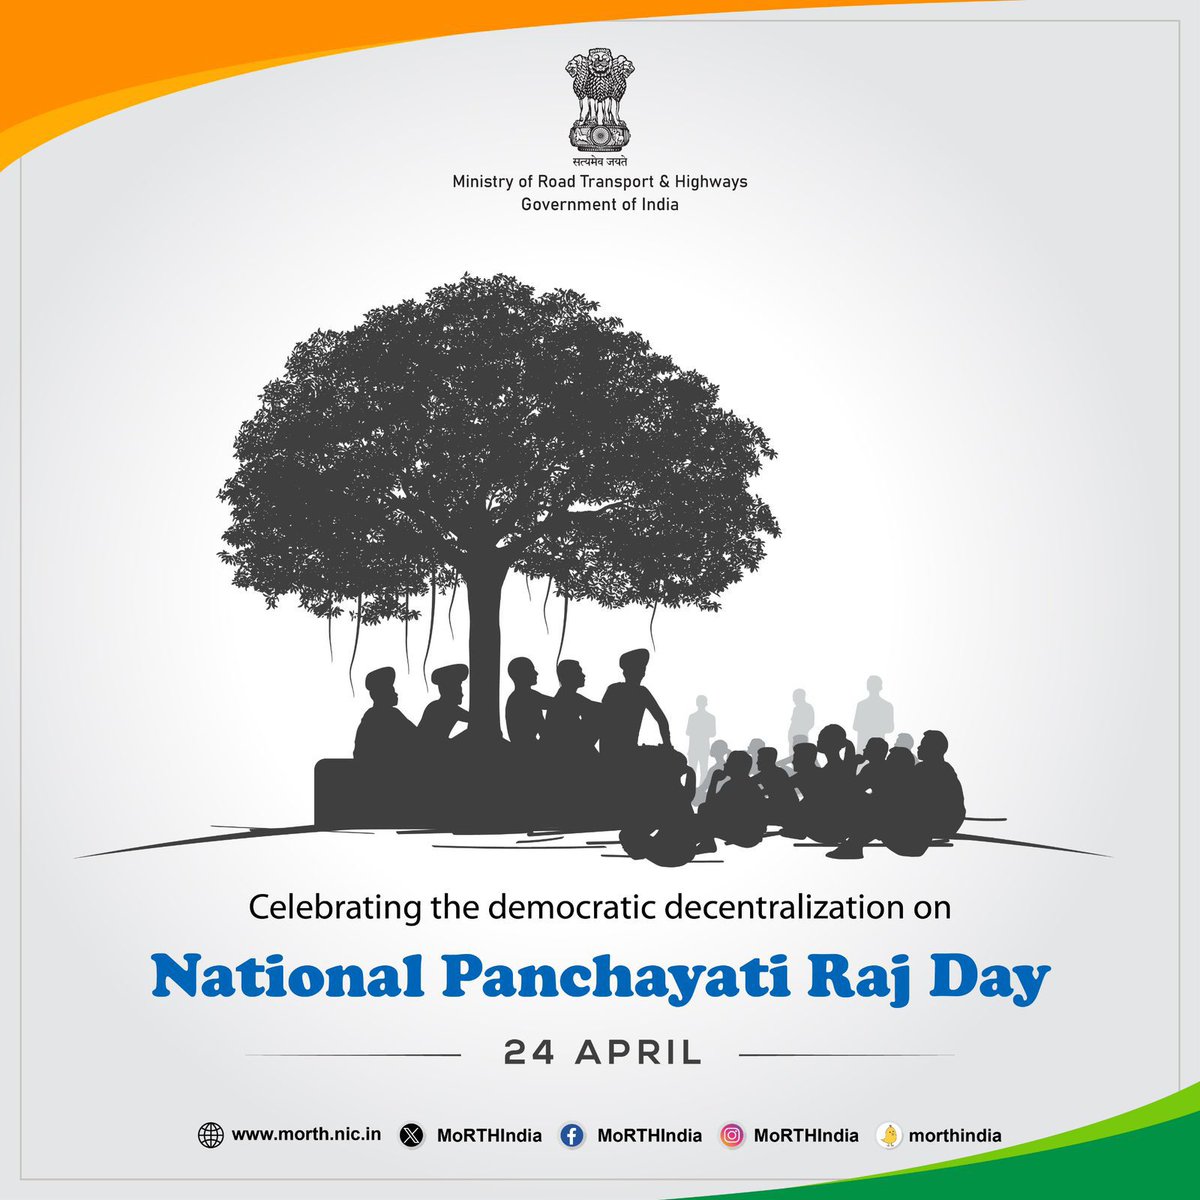 Today, let us celebrate by acknowledging the invaluable contributions of our Panchayati Raj institutions and our dedicated individuals who work tirelessly to strengthen grassroots democracy